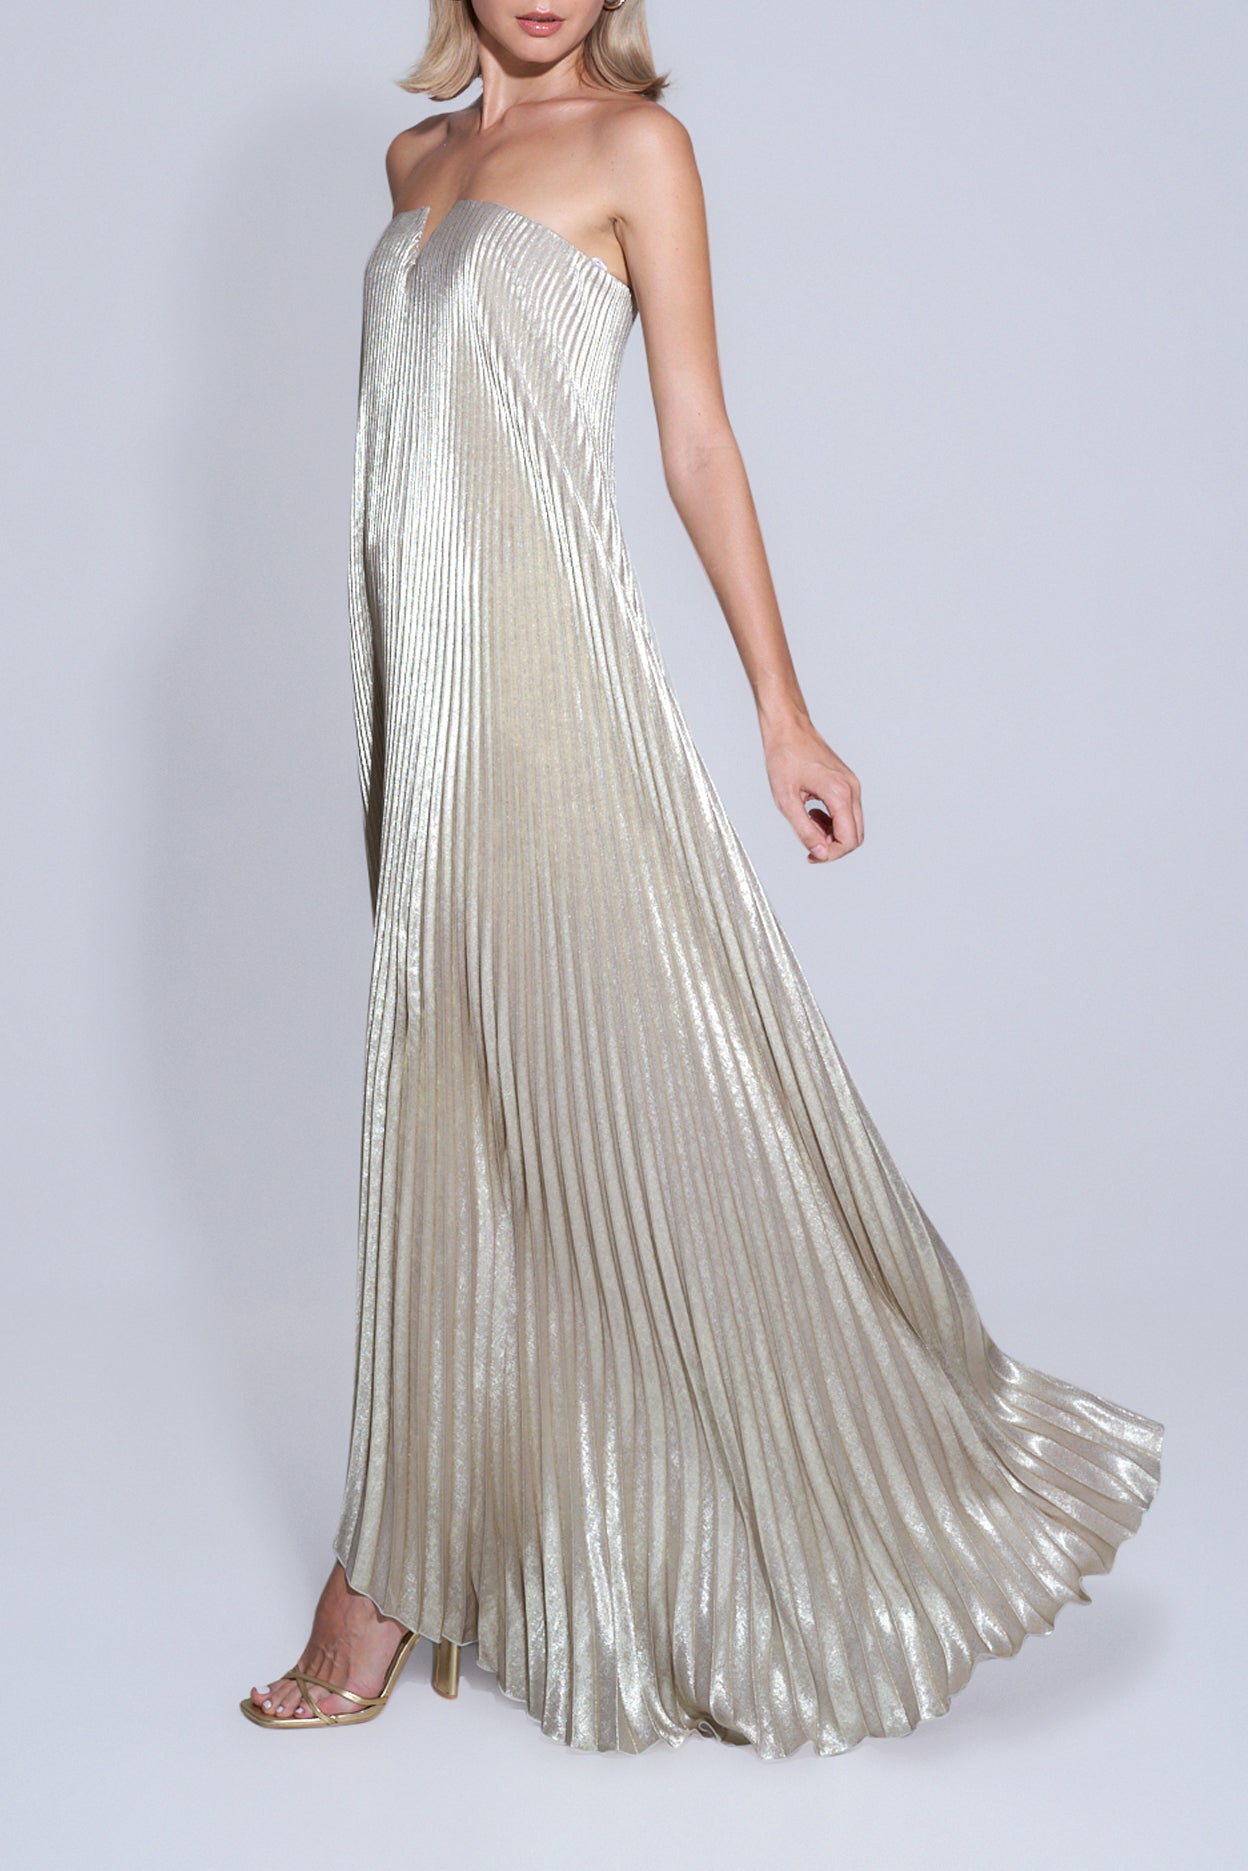 Black Tie Gown - Gold Shimmer